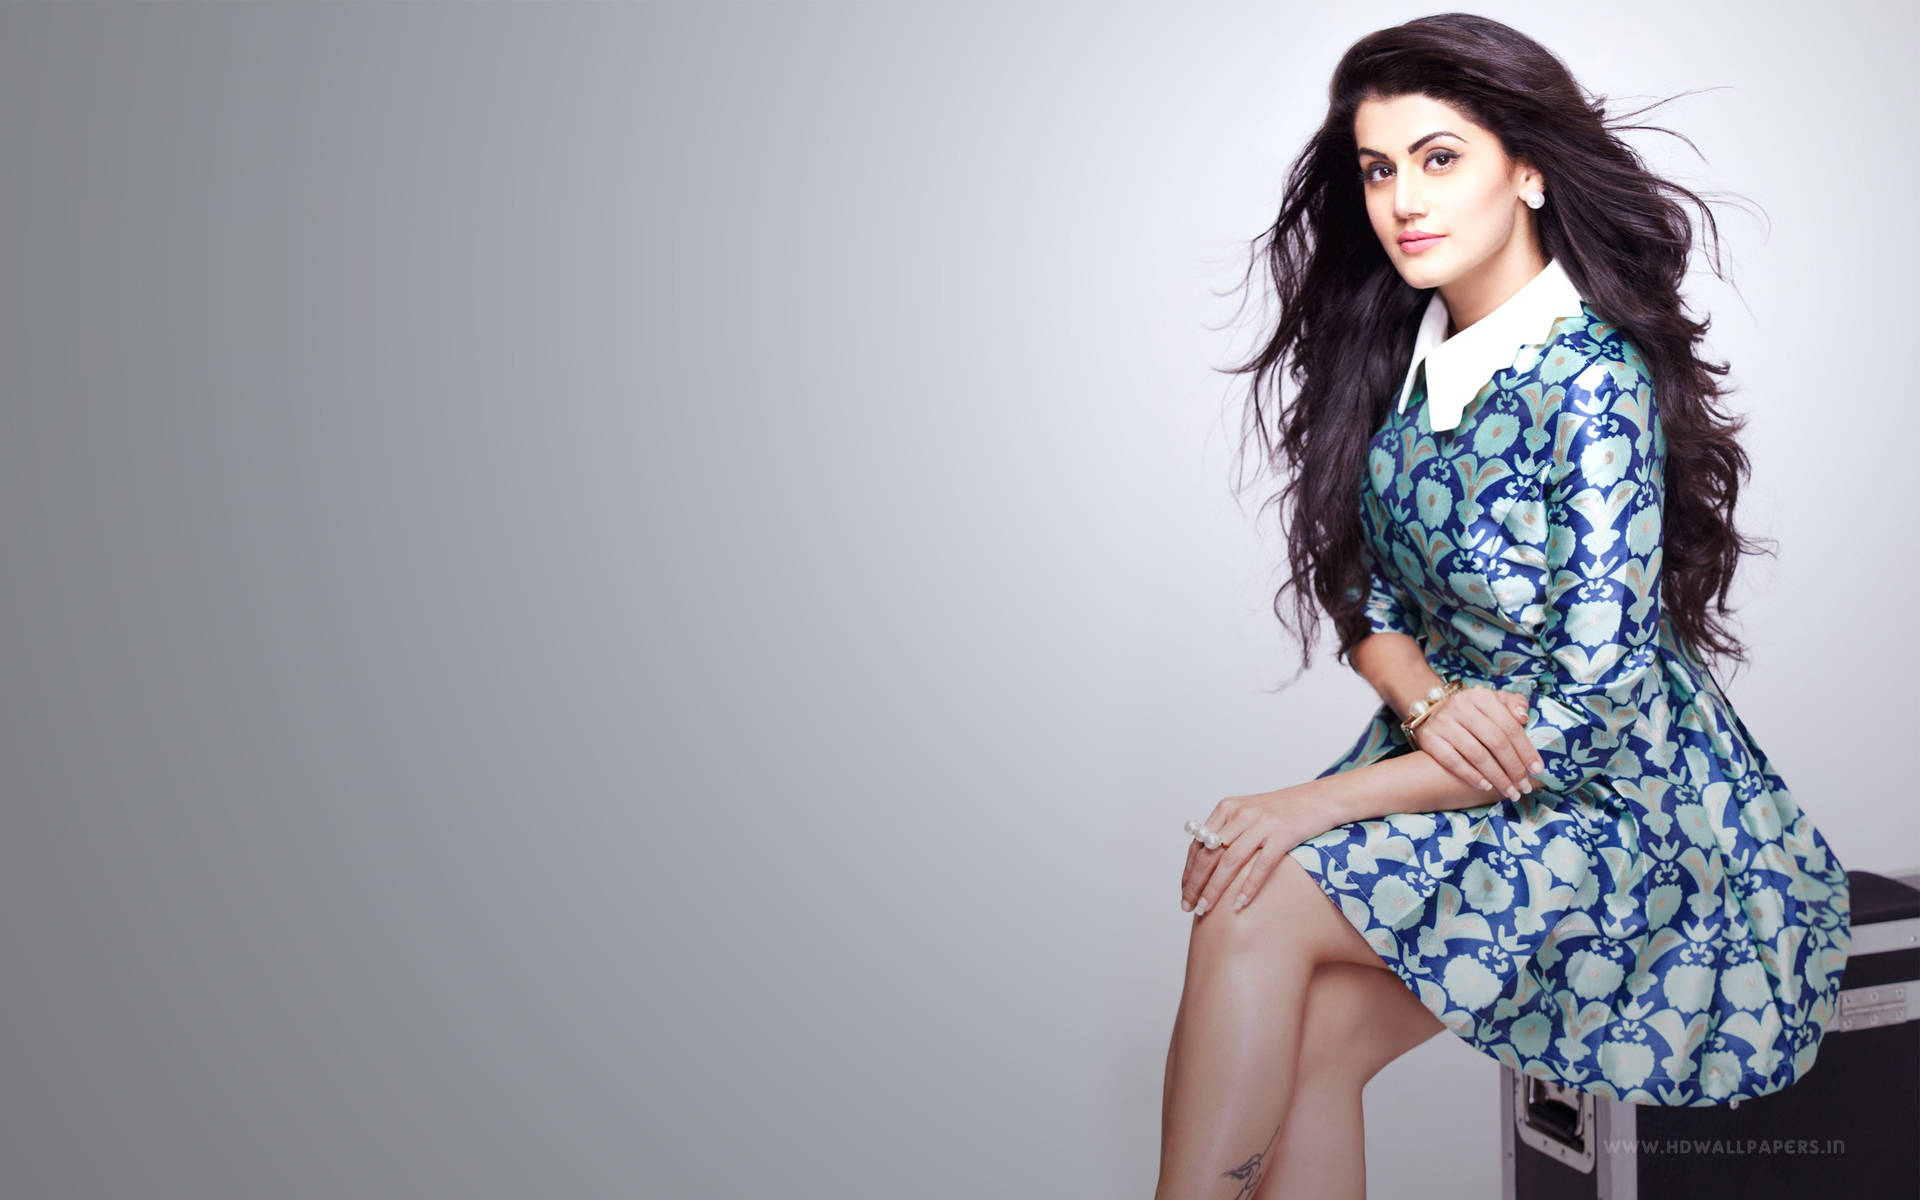 Preppy Taapsee Pannu Background